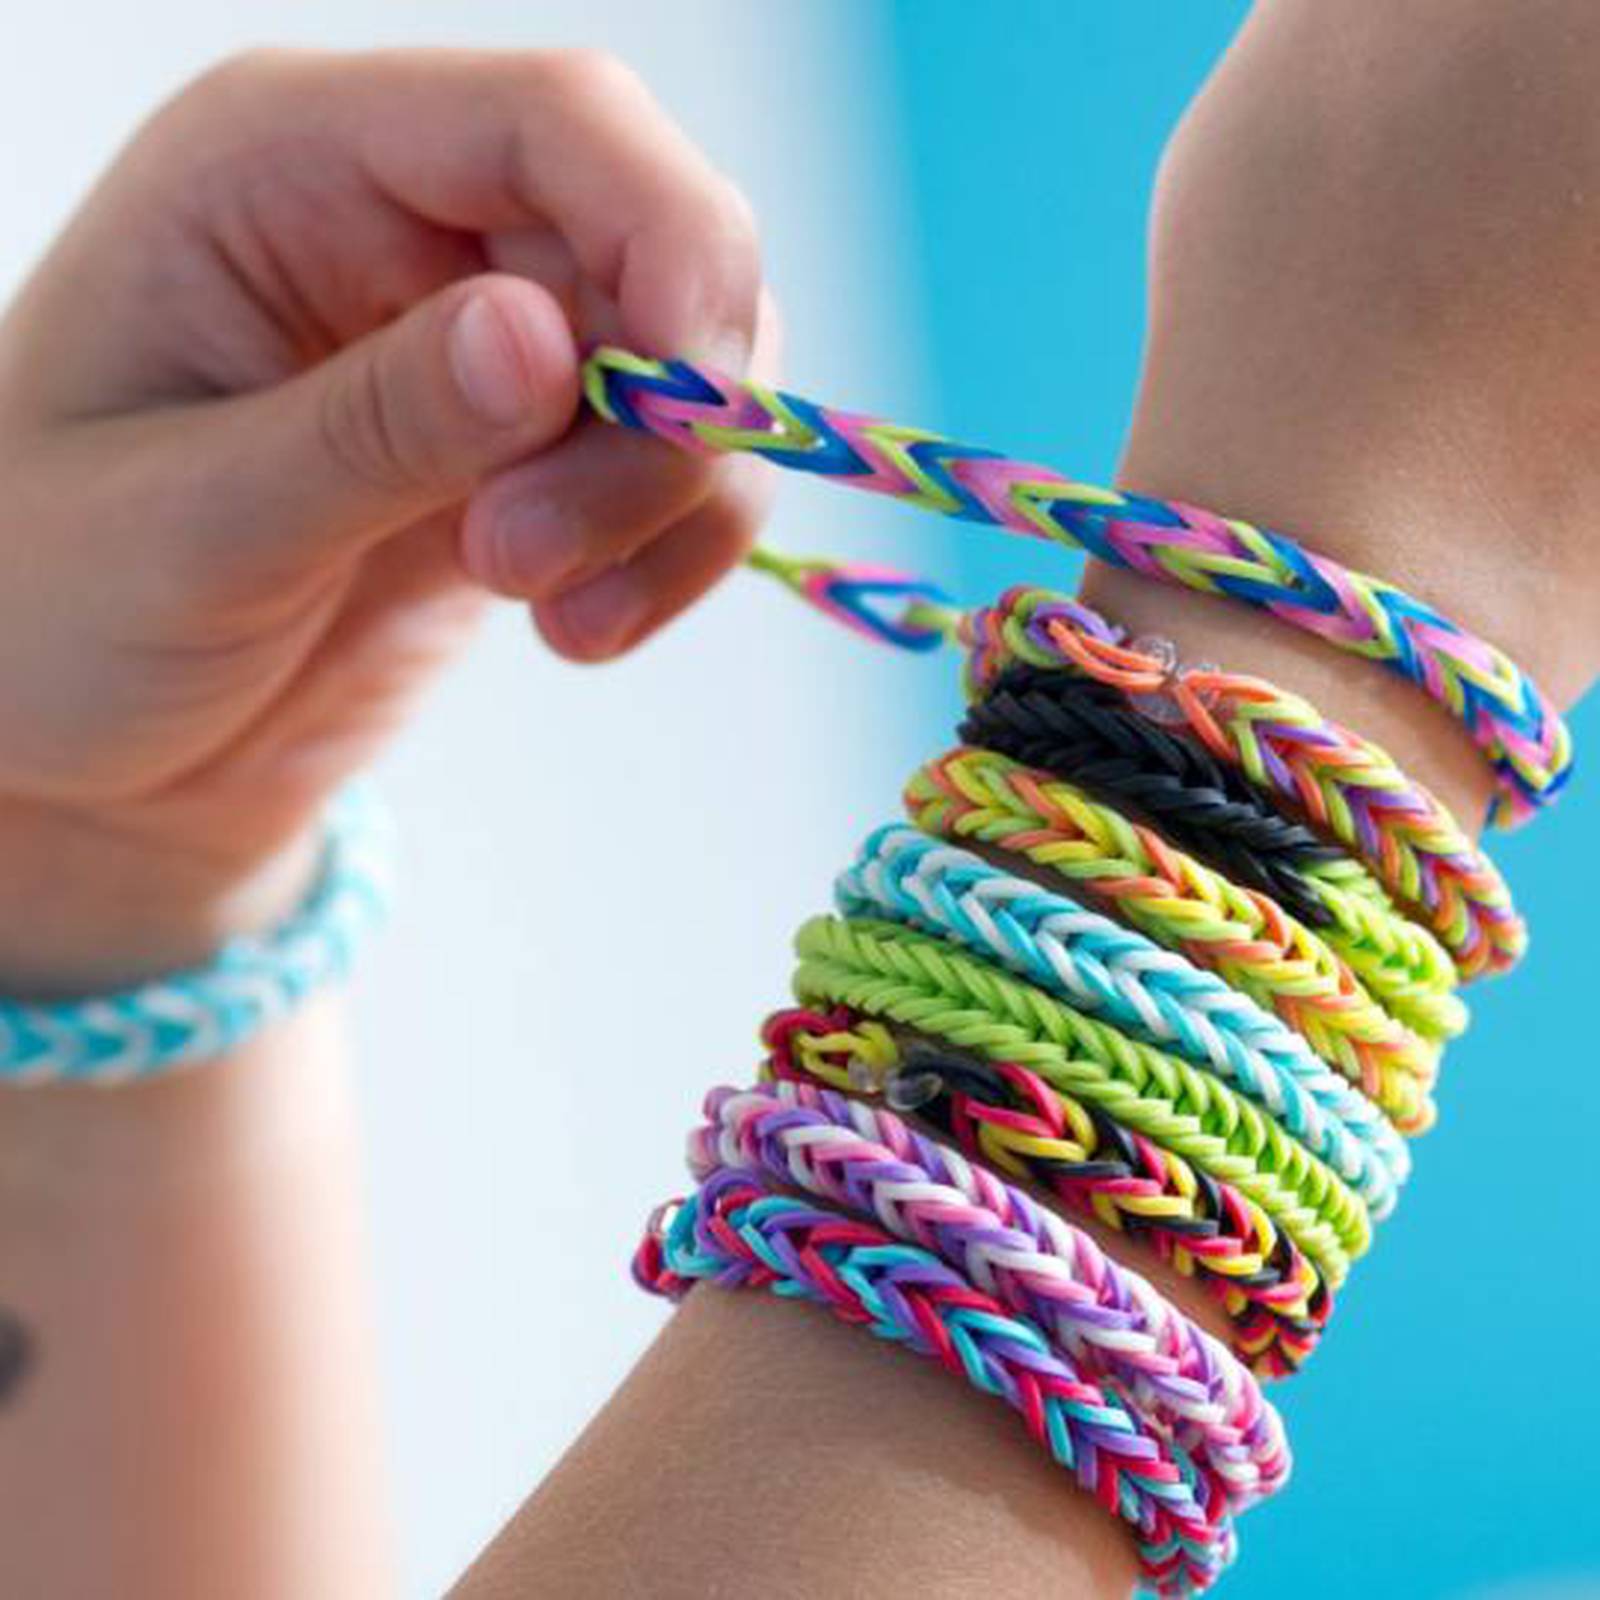 Can you be allergic to loom bands?